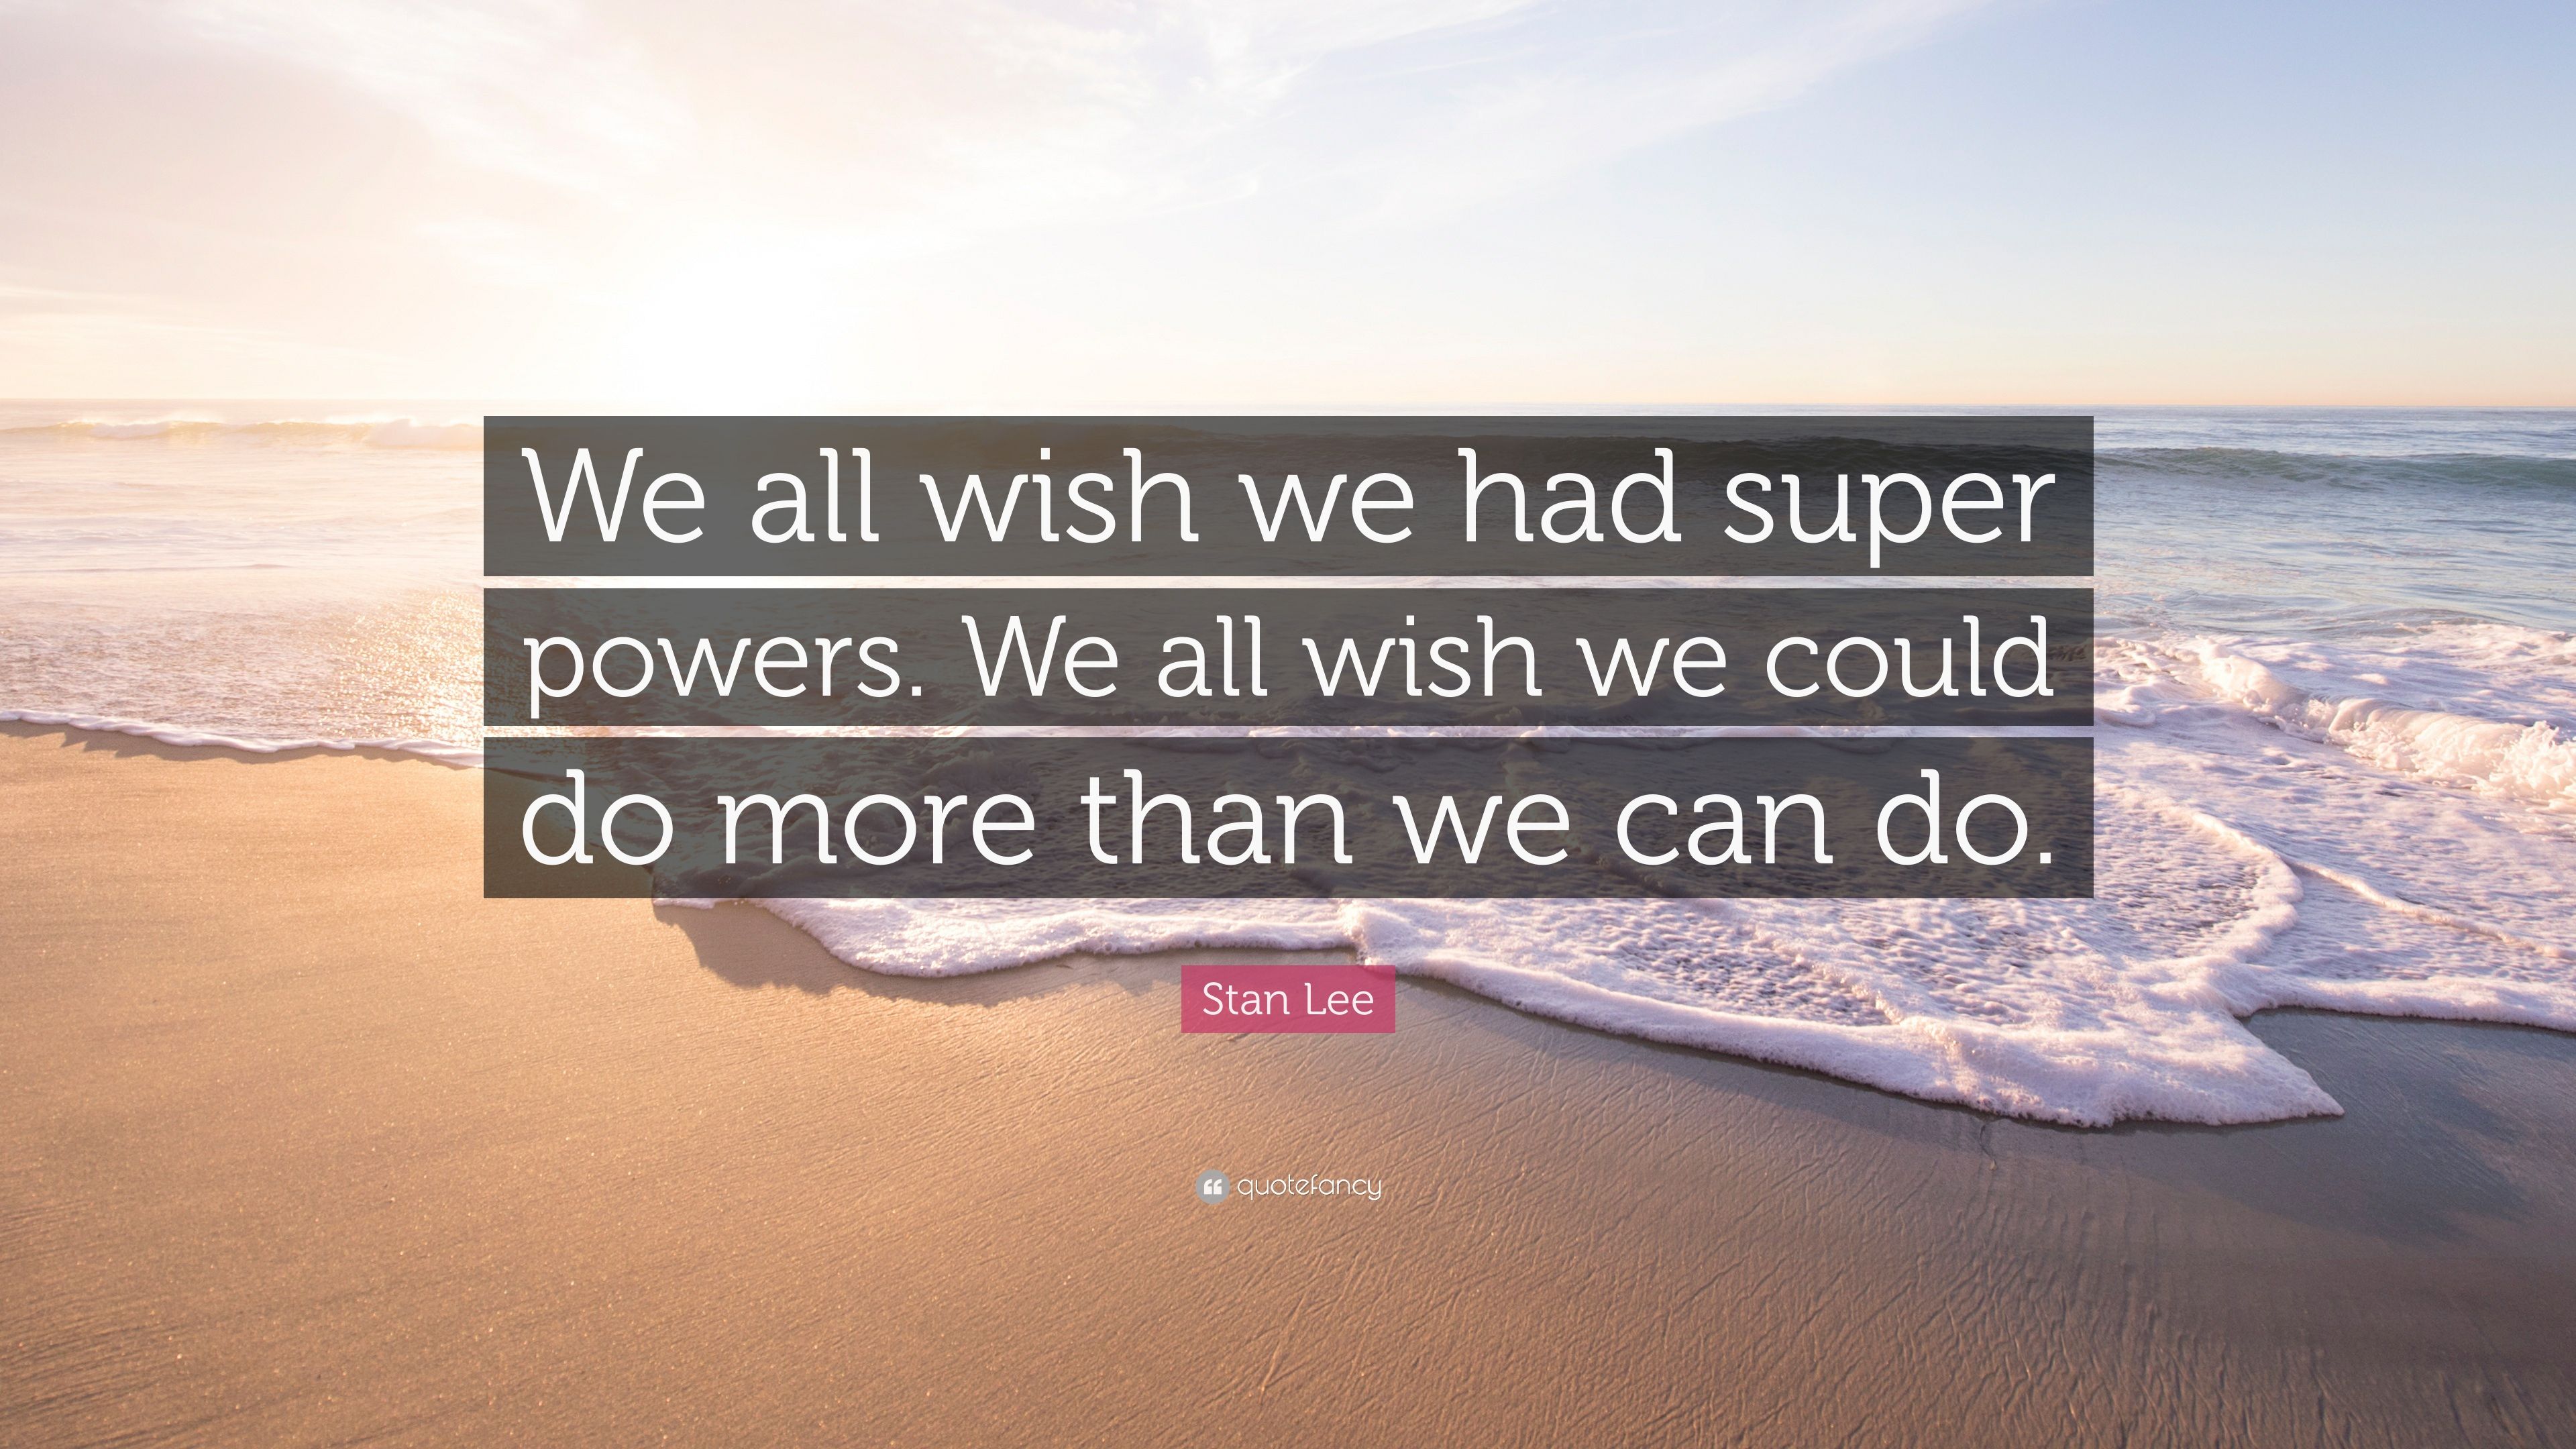 Stan Lee Quote: “We all wish we had super powers. We all wish we